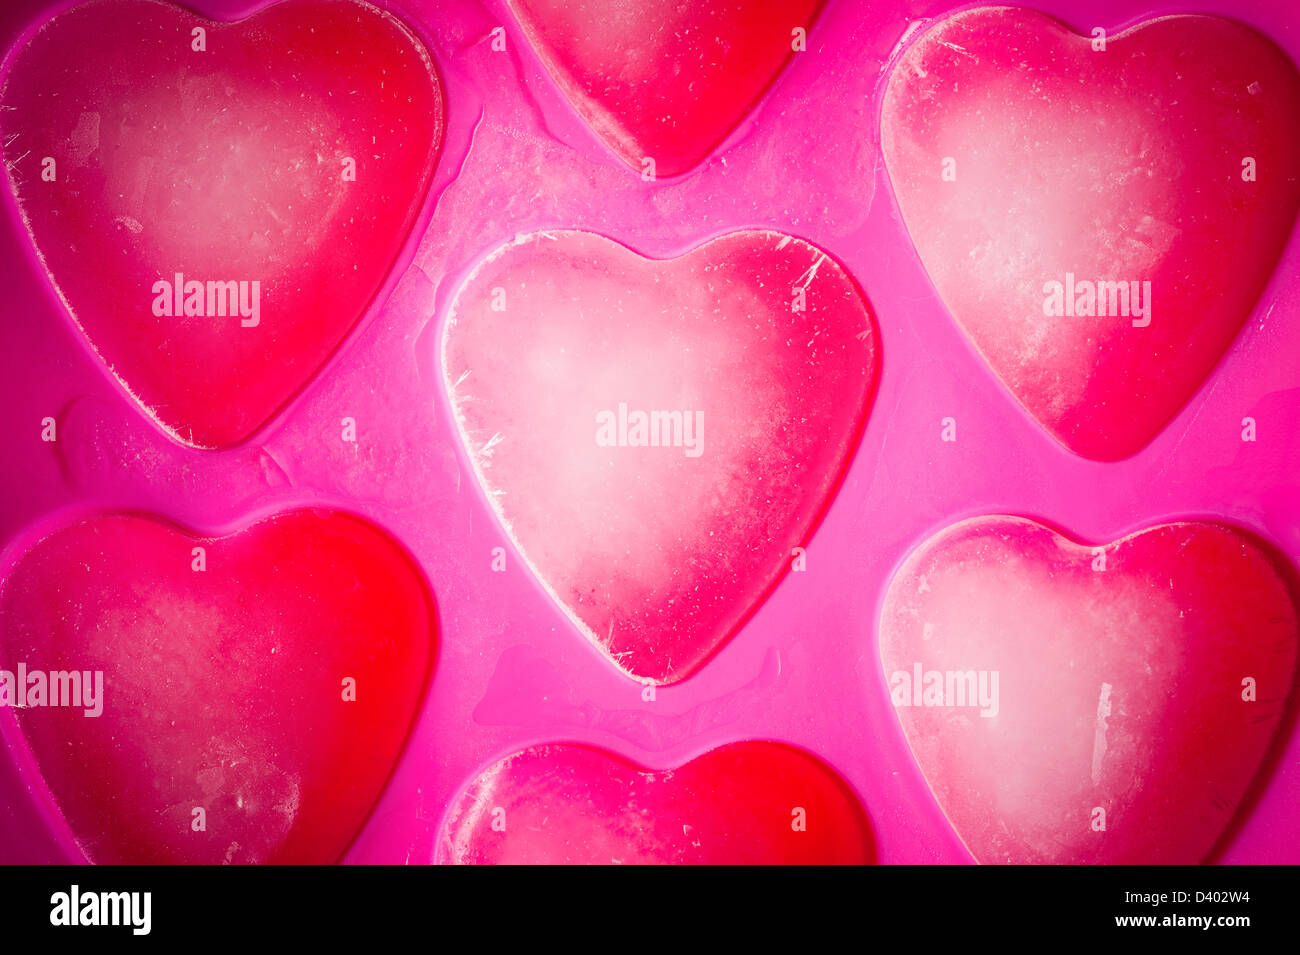 Heart-Shaped Ice Cubes in a Pink Ice Cube Tray Stock Photo